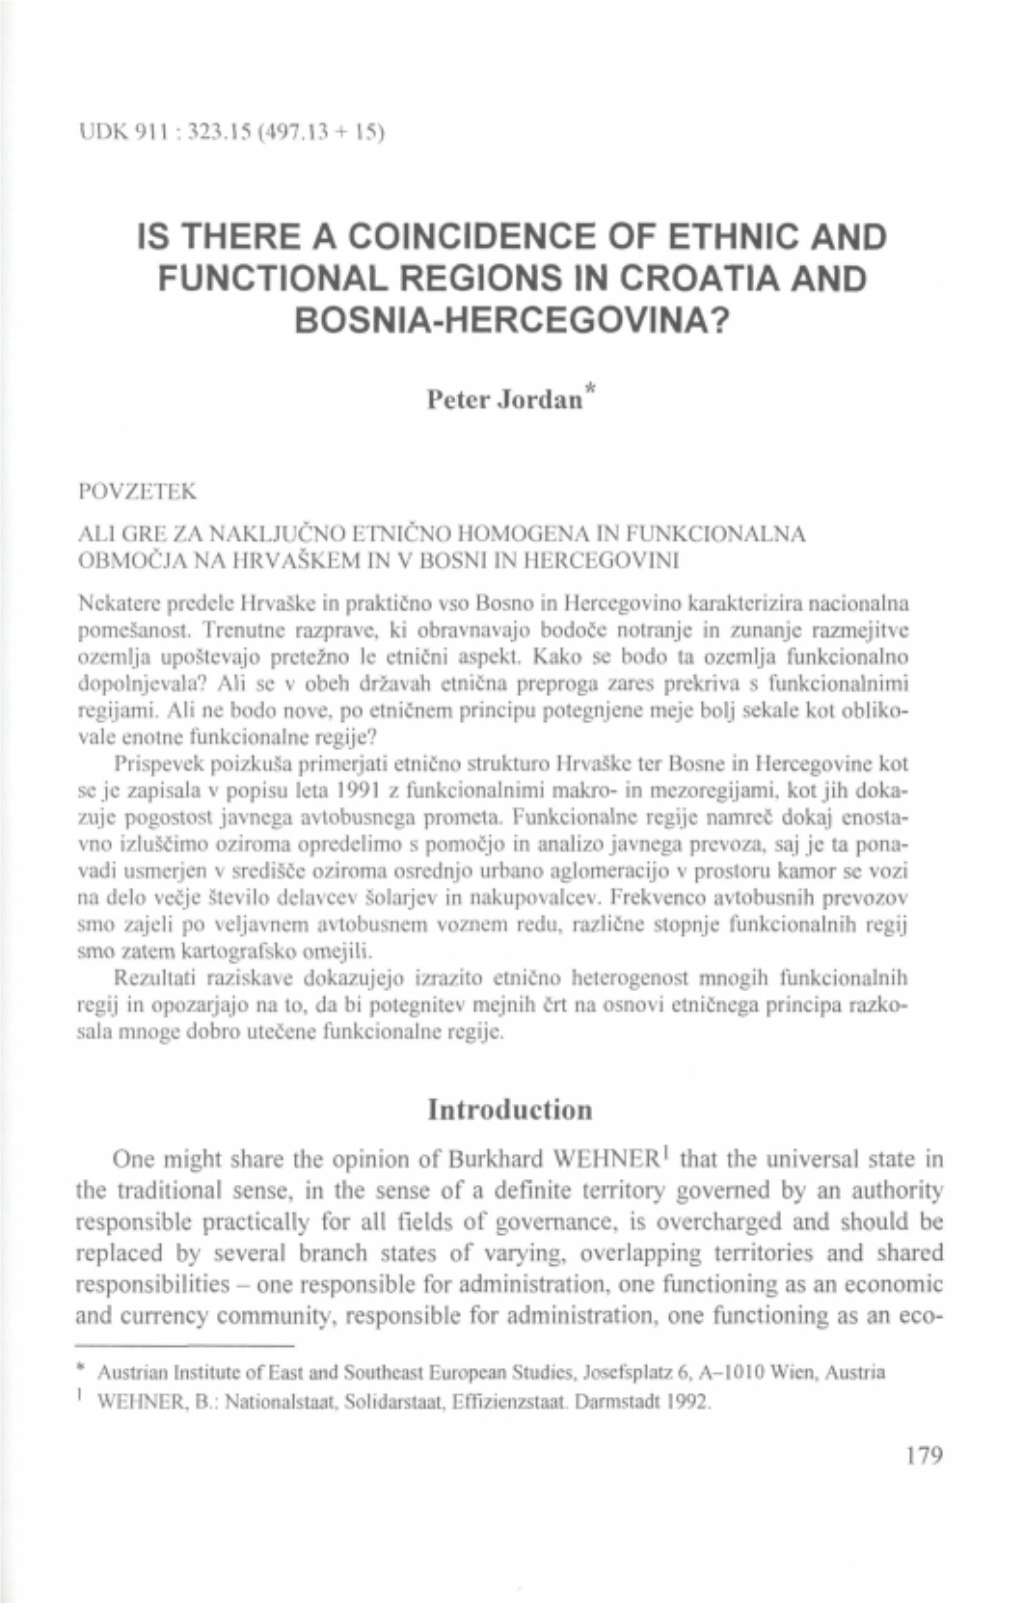 Is There a Coincidence of Ethnic and Functional Regions in Croatia and Bosnia-Hercegovina?